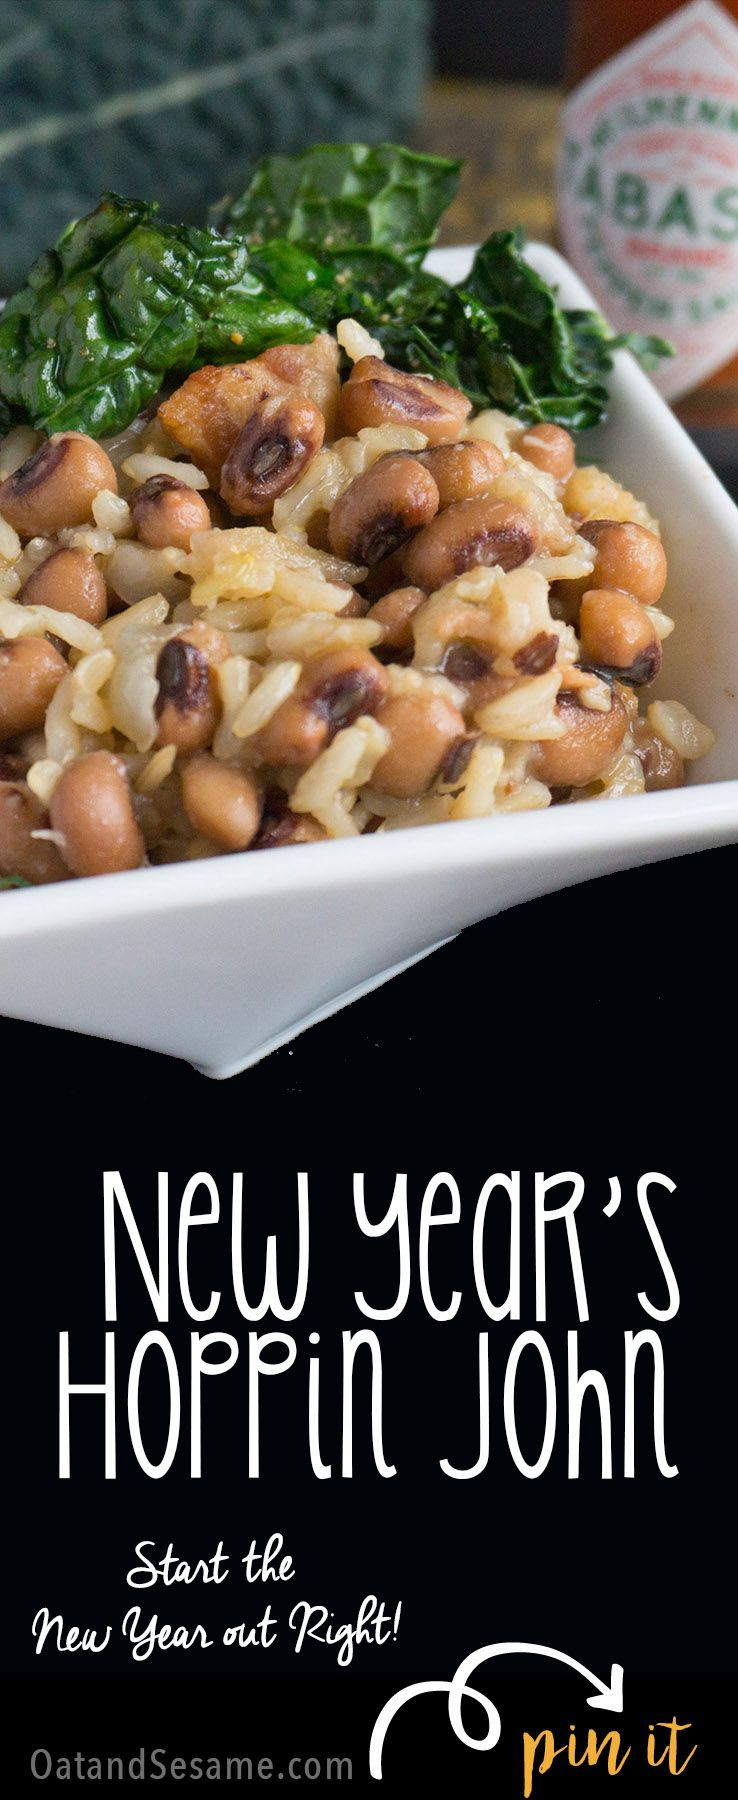 New Years Day Dinner Ideas
 Skillet Hoppin John Southern Black Eyed Peas and Rice